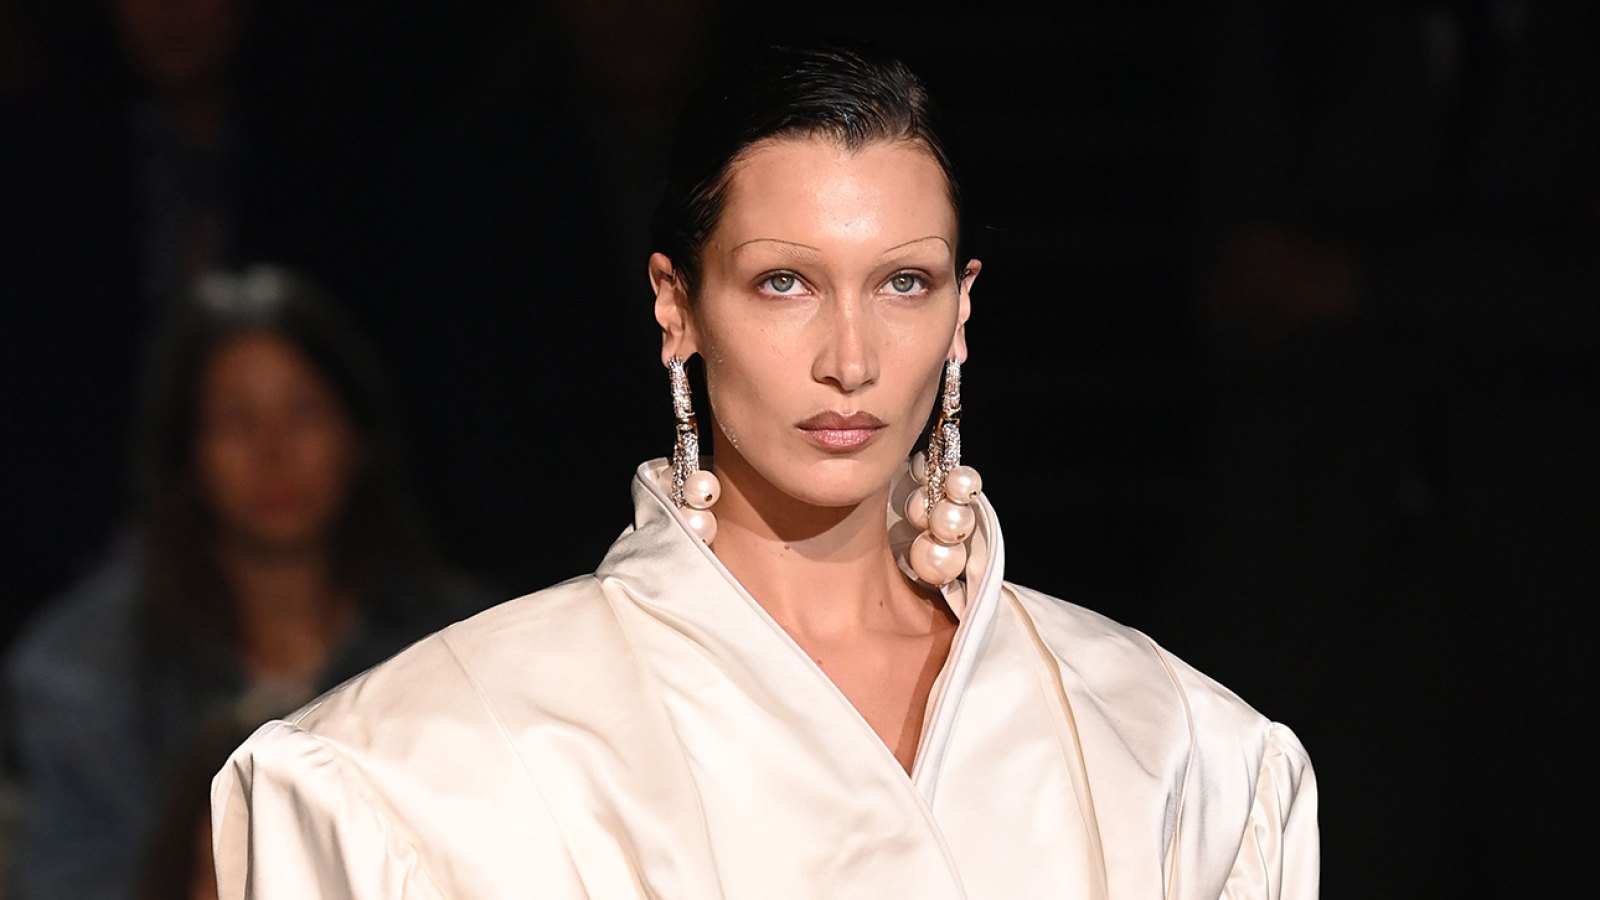 Bella Hadid Breaks Down 15 Looks From 2015 to Now, Life in Looks